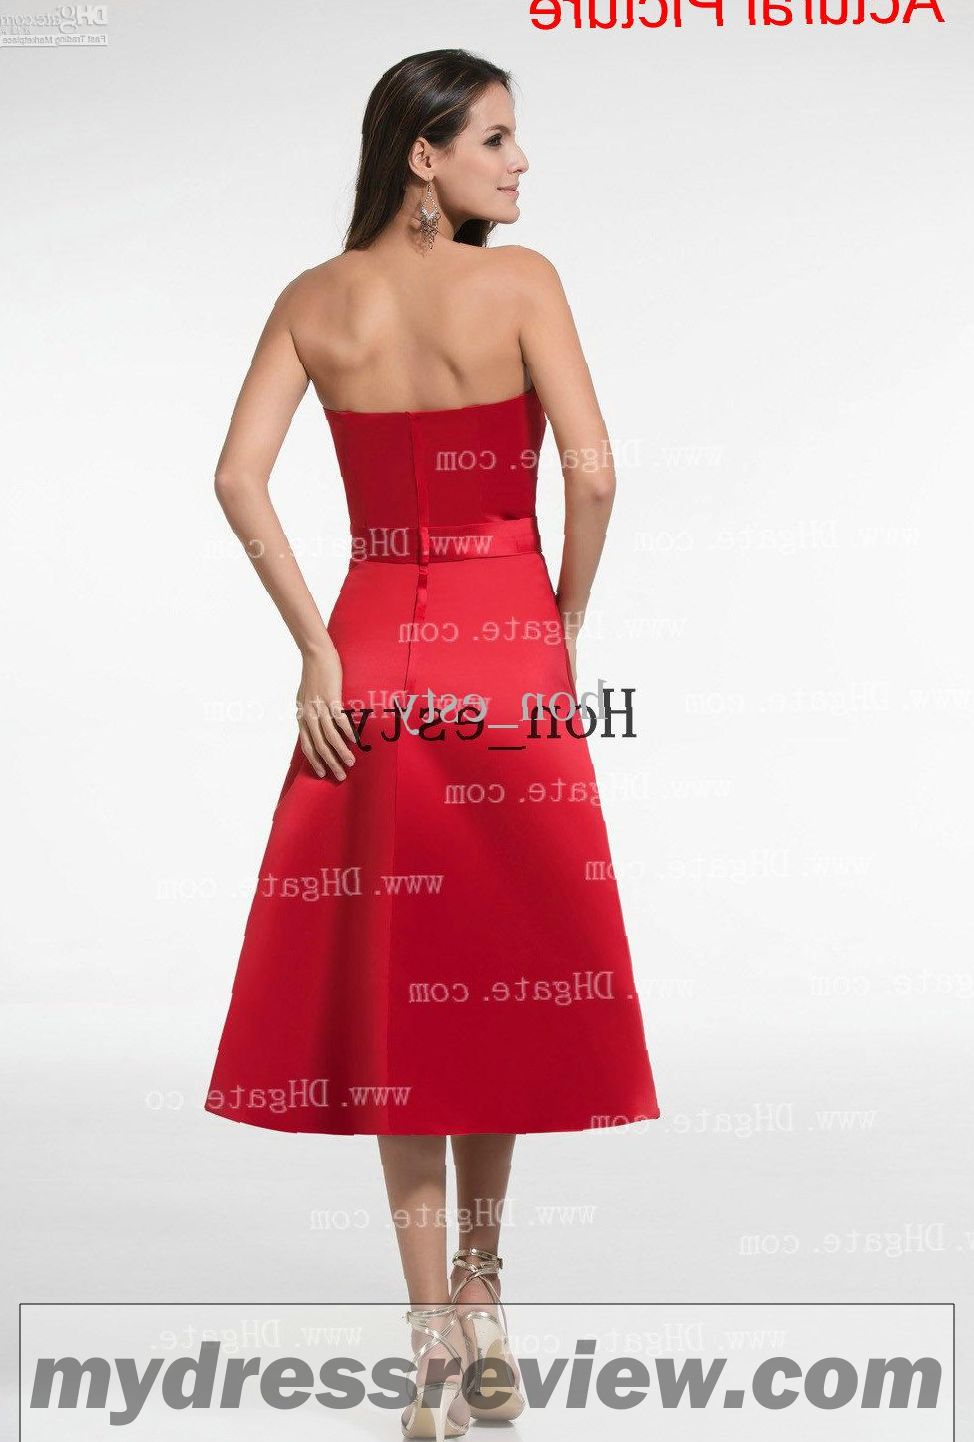 Black And Red Maid Of Honor Dresses : Overview 2017